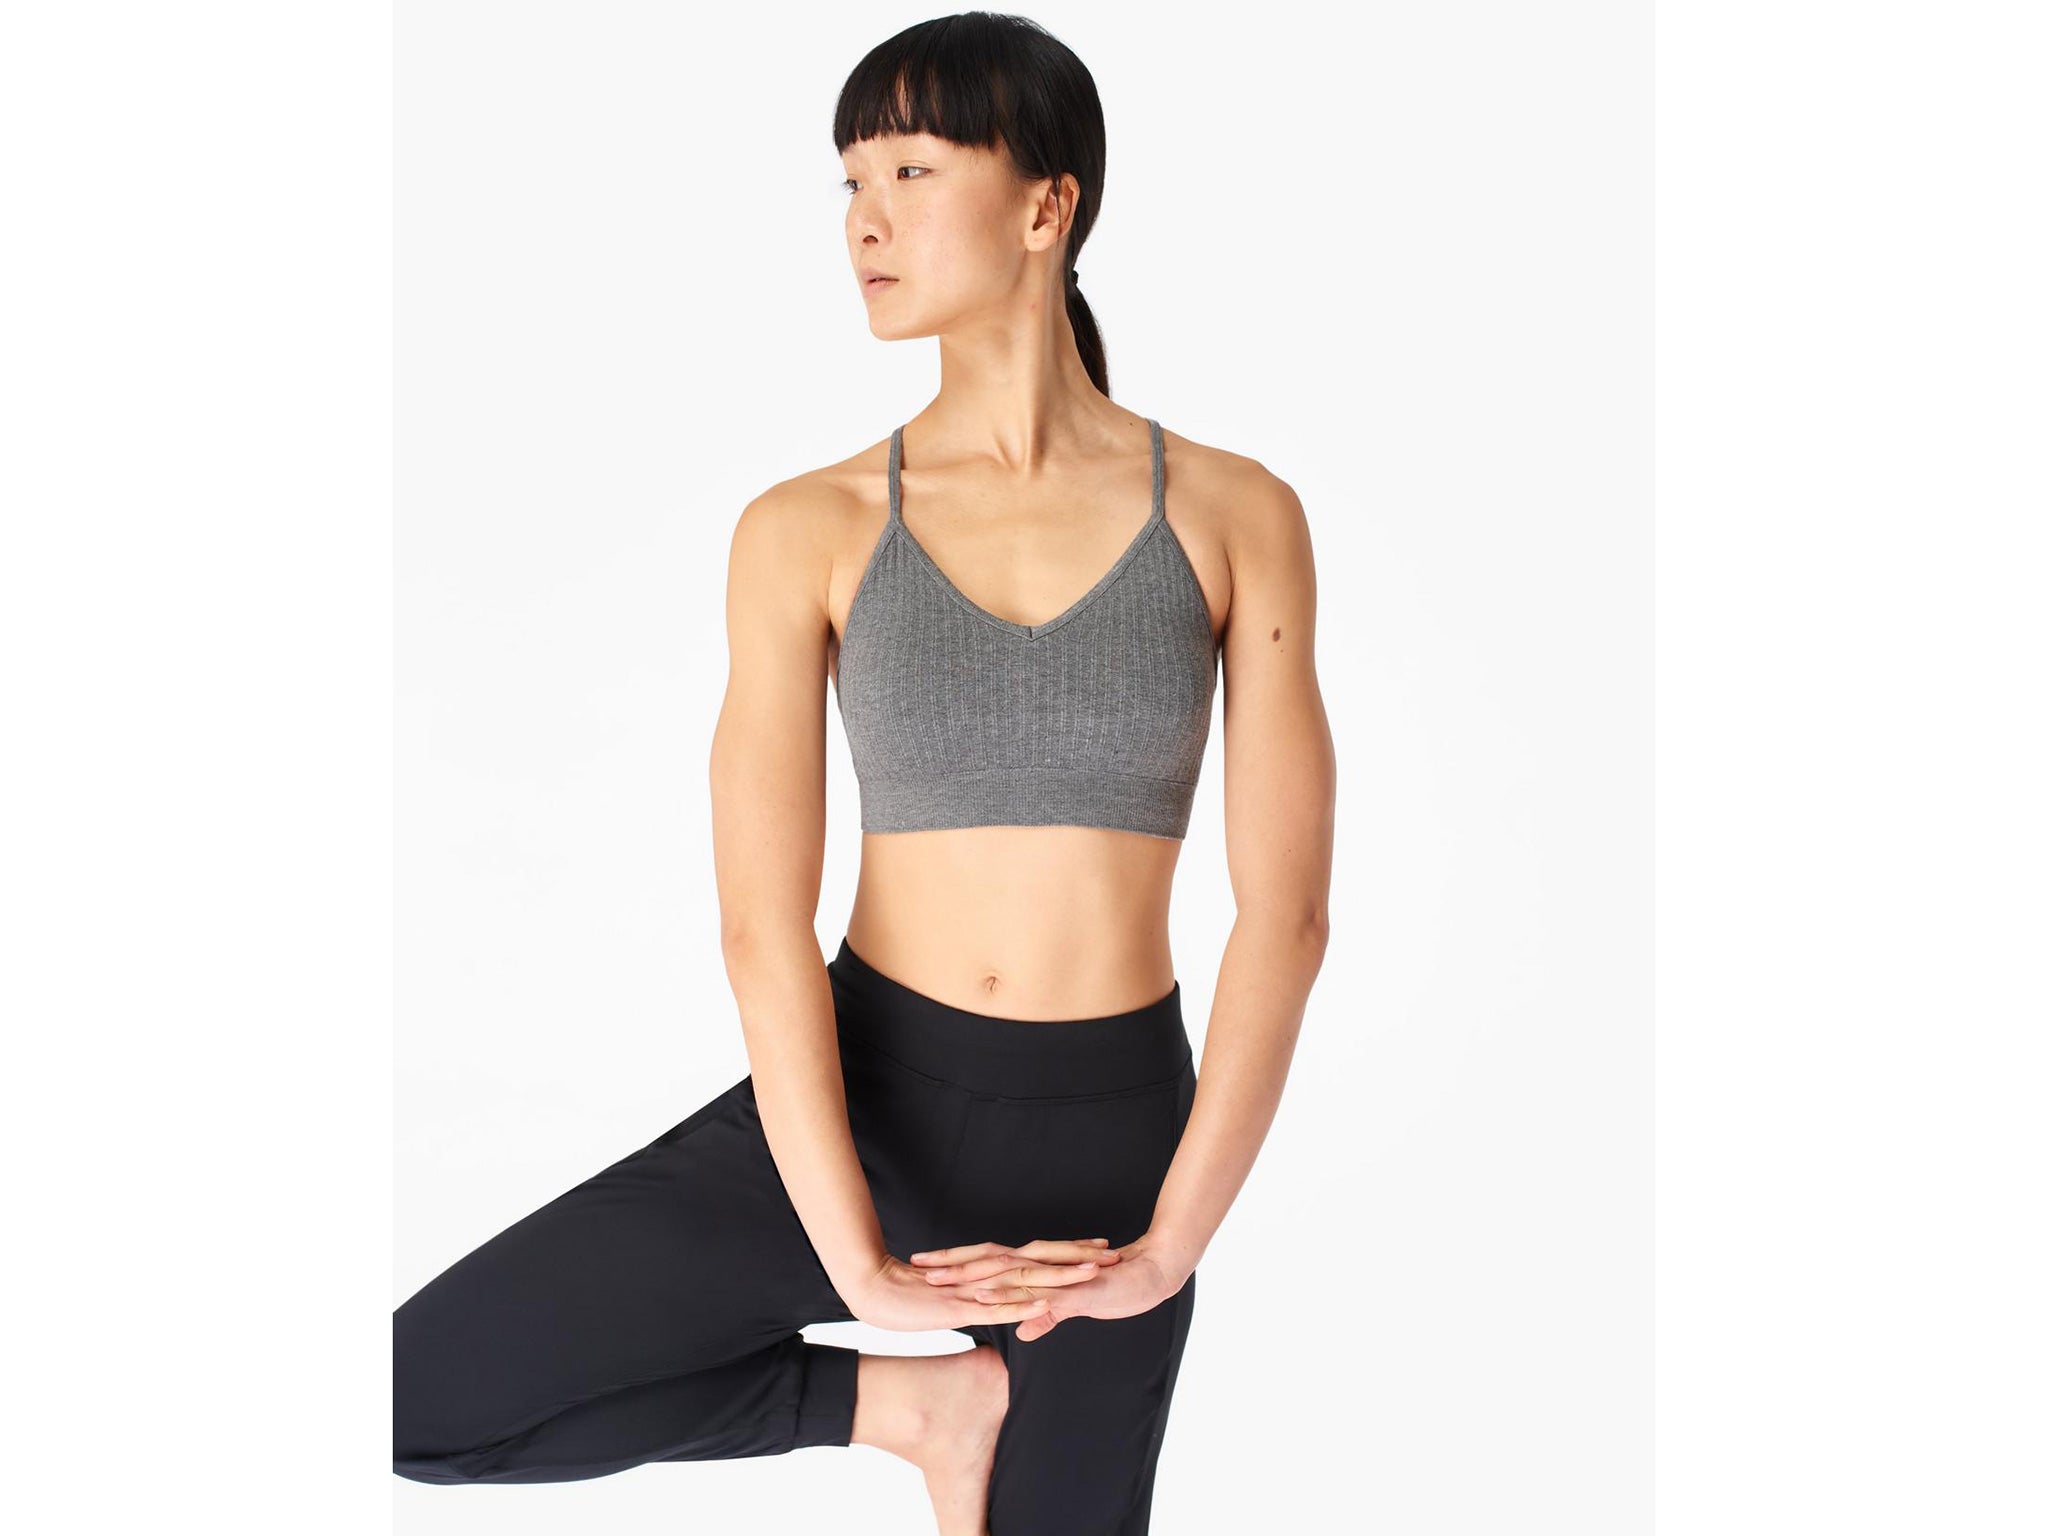 Sweaty Betty sale: How to get an extra 20% off